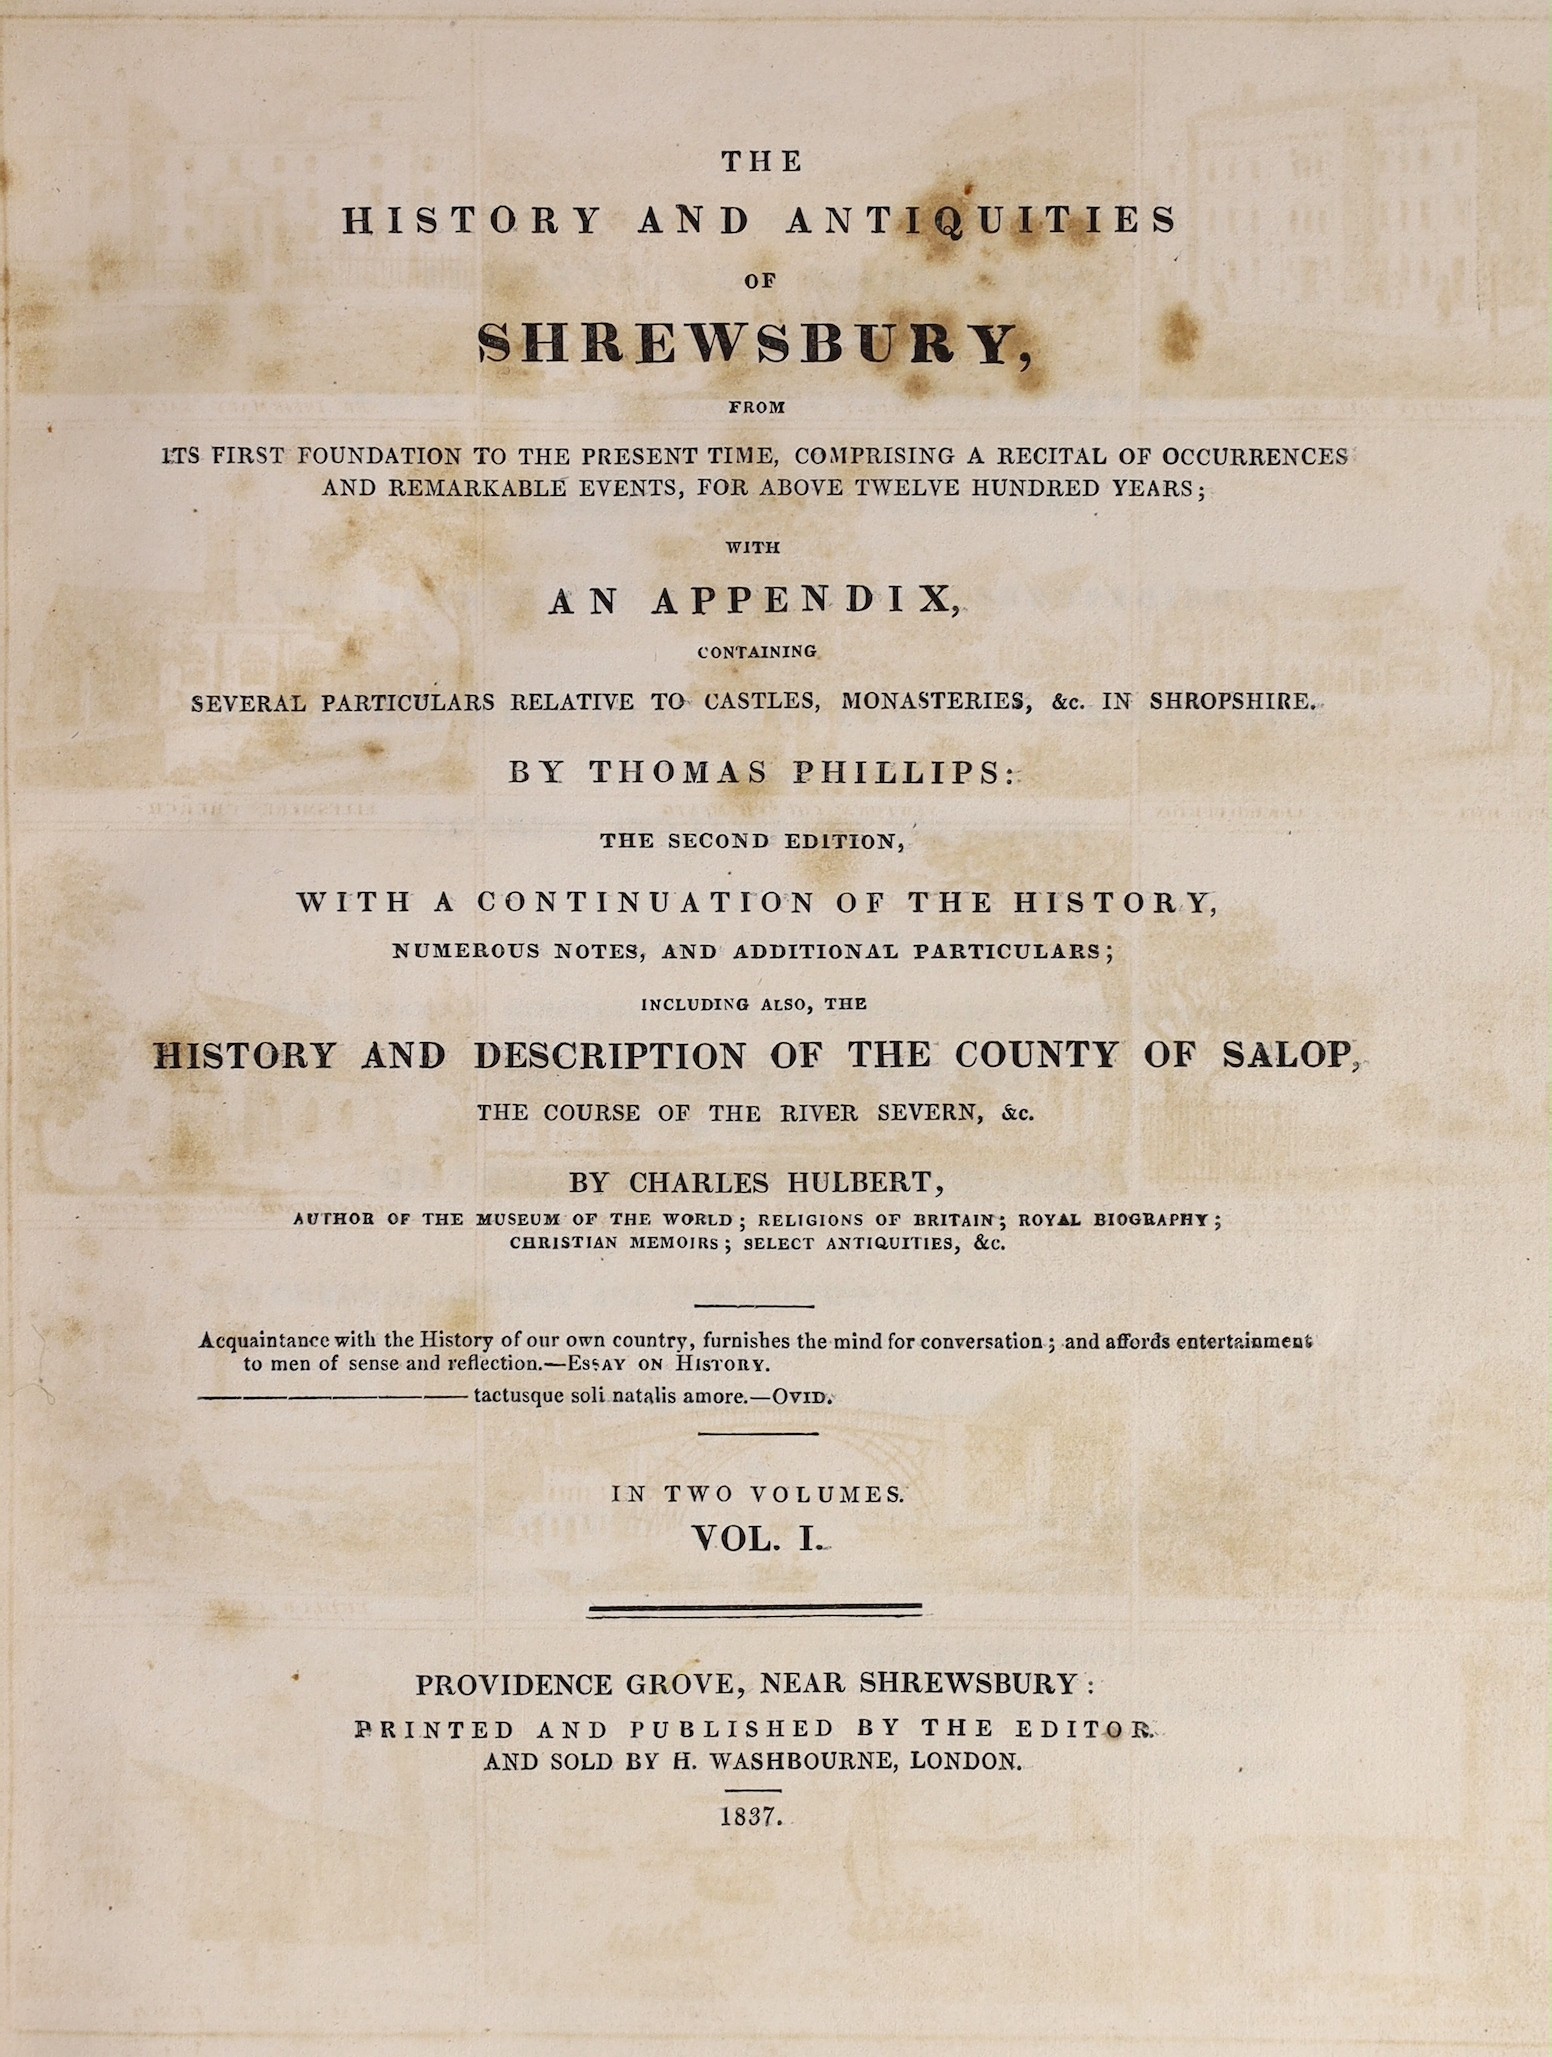 SHROPSHIRE - Phillips, Thomas and Hulbert, Charles - The History and Antiquities of Shrewsbury, including The History and Description of the County of Salop, 2 vols, 4to, calf, with map and 31 plates, spotted throughout,